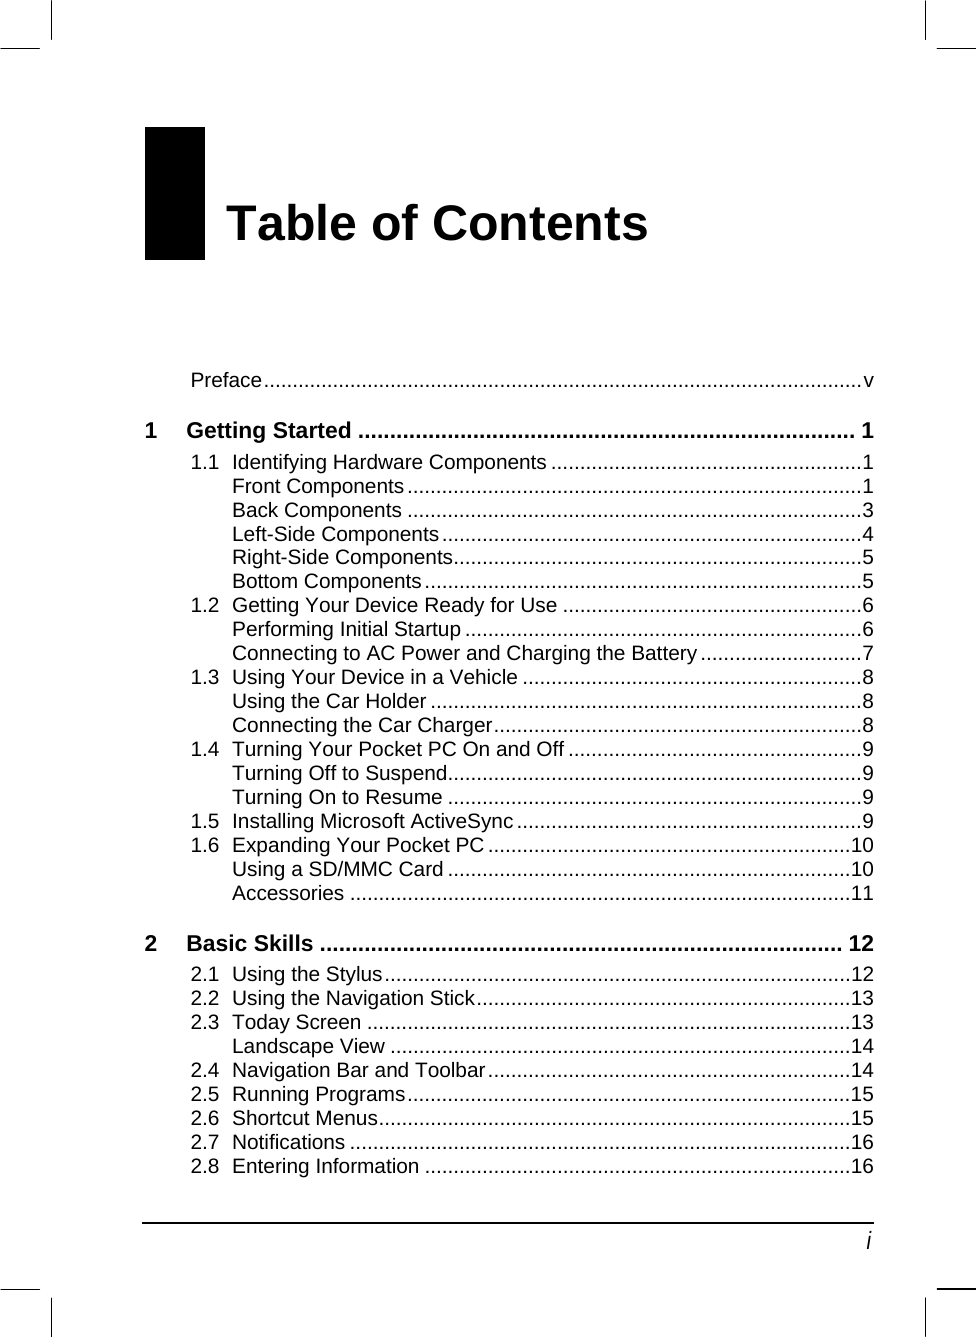   i Table of Contents Preface........................................................................................................v 1 Getting Started .............................................................................. 1 1.1 Identifying Hardware Components ......................................................1 Front Components...............................................................................1 Back Components ...............................................................................3 Left-Side Components.........................................................................4 Right-Side Components.......................................................................5 Bottom Components............................................................................5 1.2 Getting Your Device Ready for Use ....................................................6 Performing Initial Startup .....................................................................6 Connecting to AC Power and Charging the Battery............................7 1.3 Using Your Device in a Vehicle ...........................................................8 Using the Car Holder ...........................................................................8 Connecting the Car Charger................................................................8 1.4 Turning Your Pocket PC On and Off ...................................................9 Turning Off to Suspend........................................................................9 Turning On to Resume ........................................................................9 1.5 Installing Microsoft ActiveSync ............................................................9 1.6 Expanding Your Pocket PC ...............................................................10 Using a SD/MMC Card ......................................................................10 Accessories .......................................................................................11 2 Basic Skills .................................................................................. 12 2.1 Using the Stylus.................................................................................12 2.2 Using the Navigation Stick.................................................................13 2.3 Today Screen ....................................................................................13 Landscape View ................................................................................14 2.4 Navigation Bar and Toolbar...............................................................14 2.5 Running Programs.............................................................................15 2.6 Shortcut Menus..................................................................................15 2.7 Notifications .......................................................................................16 2.8 Entering Information ..........................................................................16 